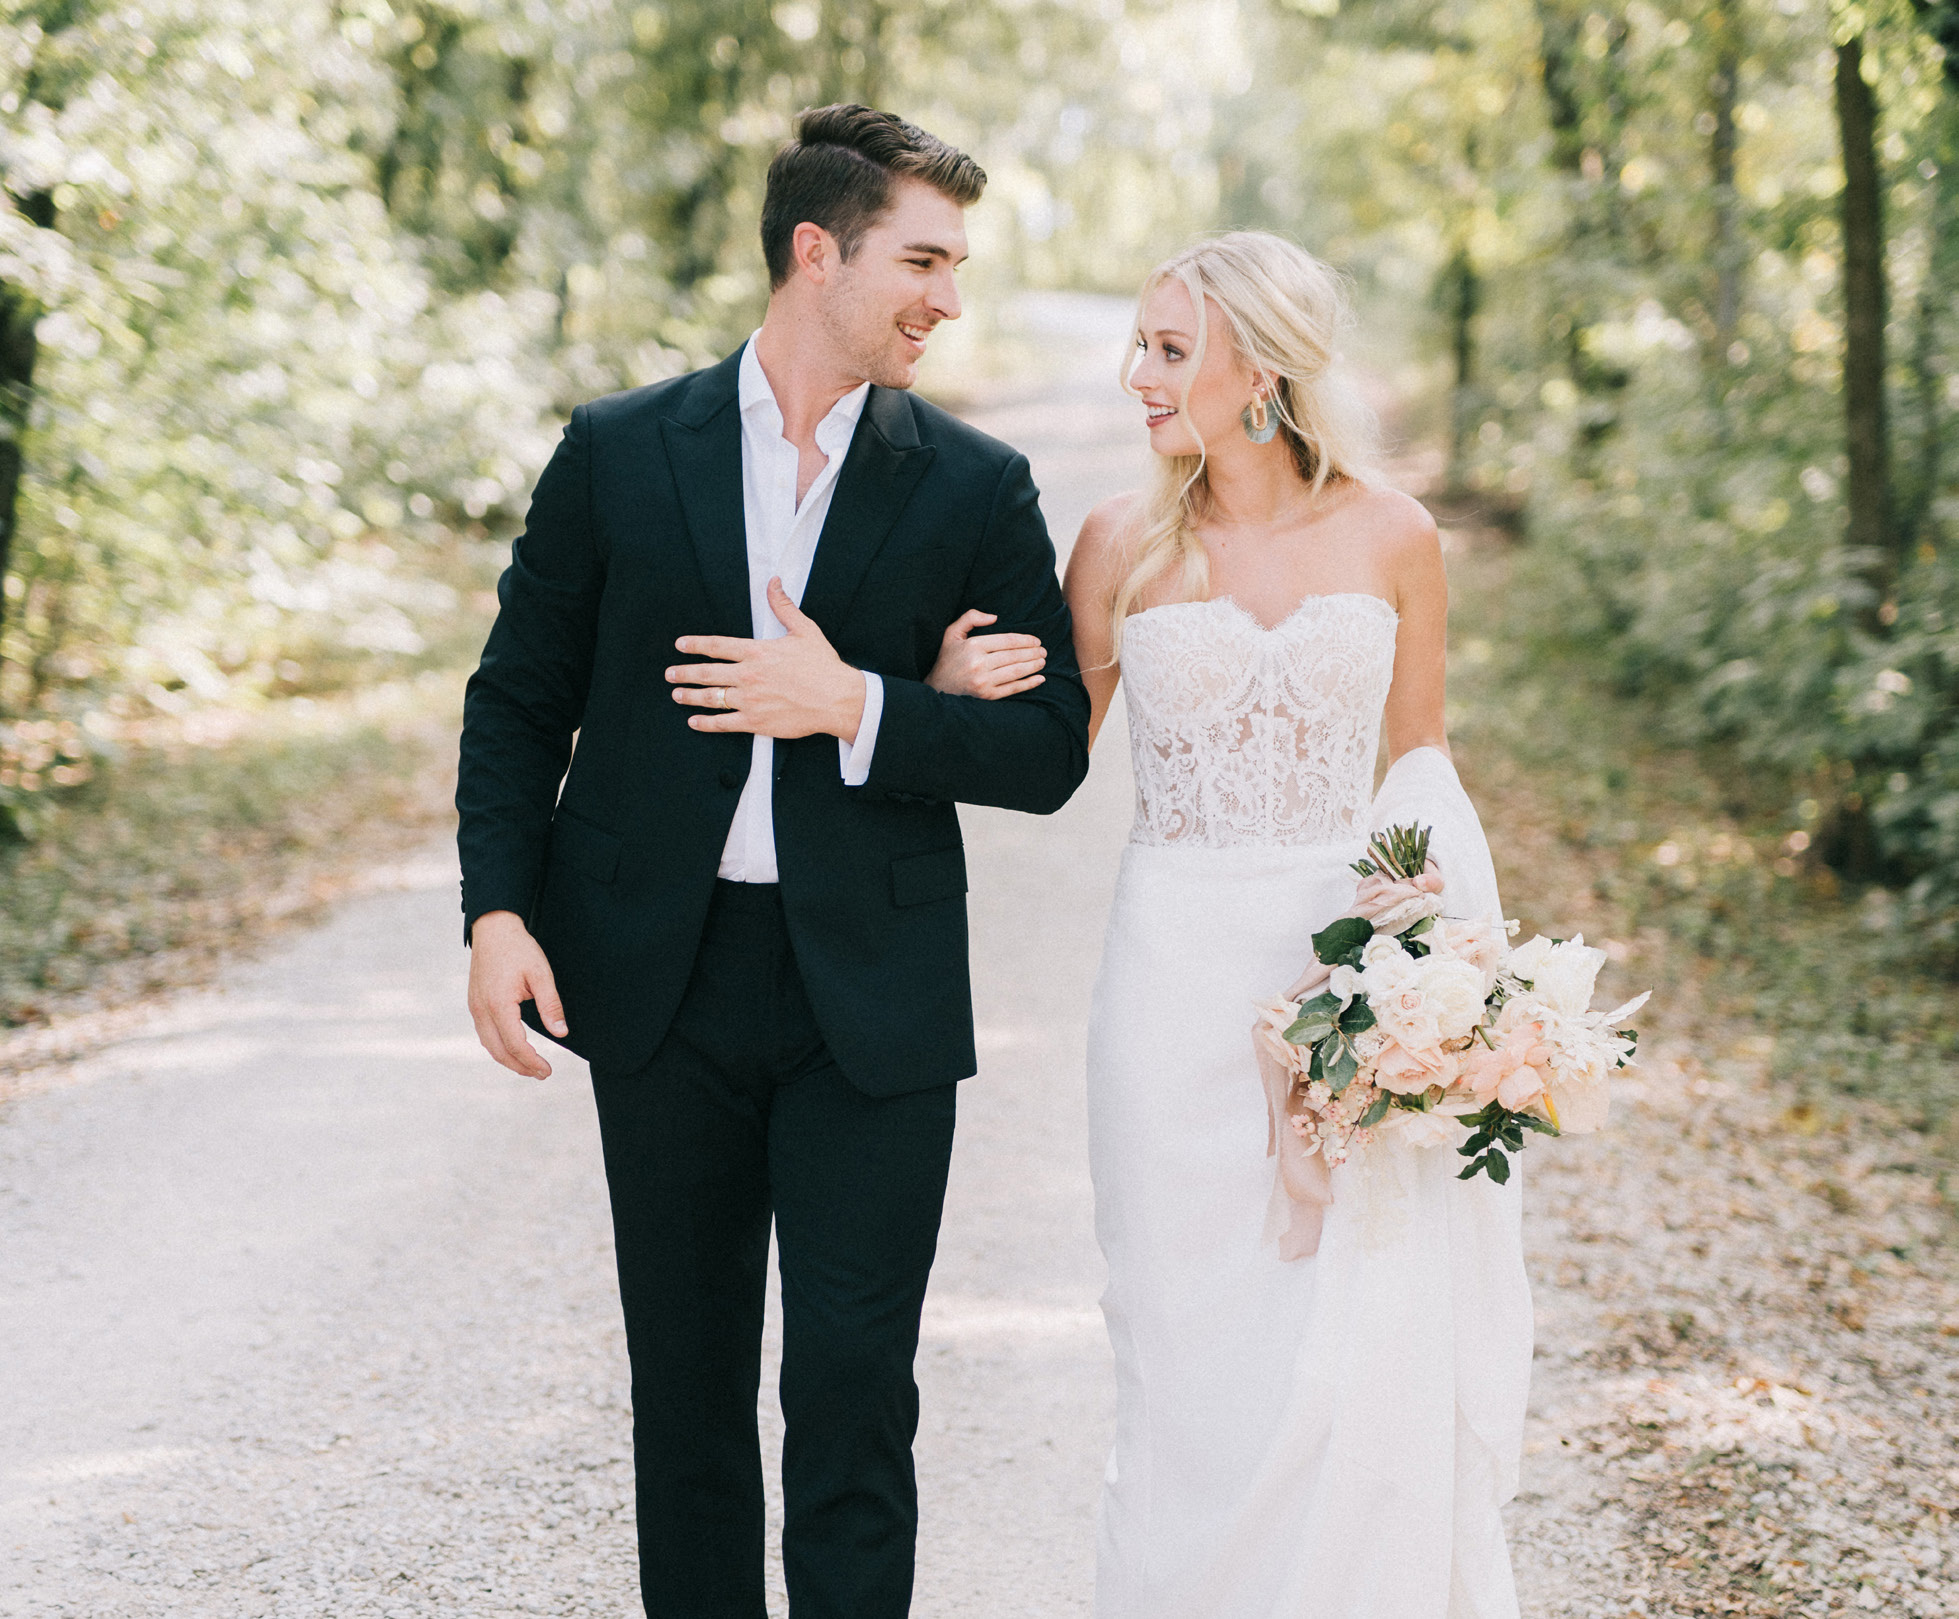 This Soft Boho Wedding’s Neutral Hues are Ideal for Any Season